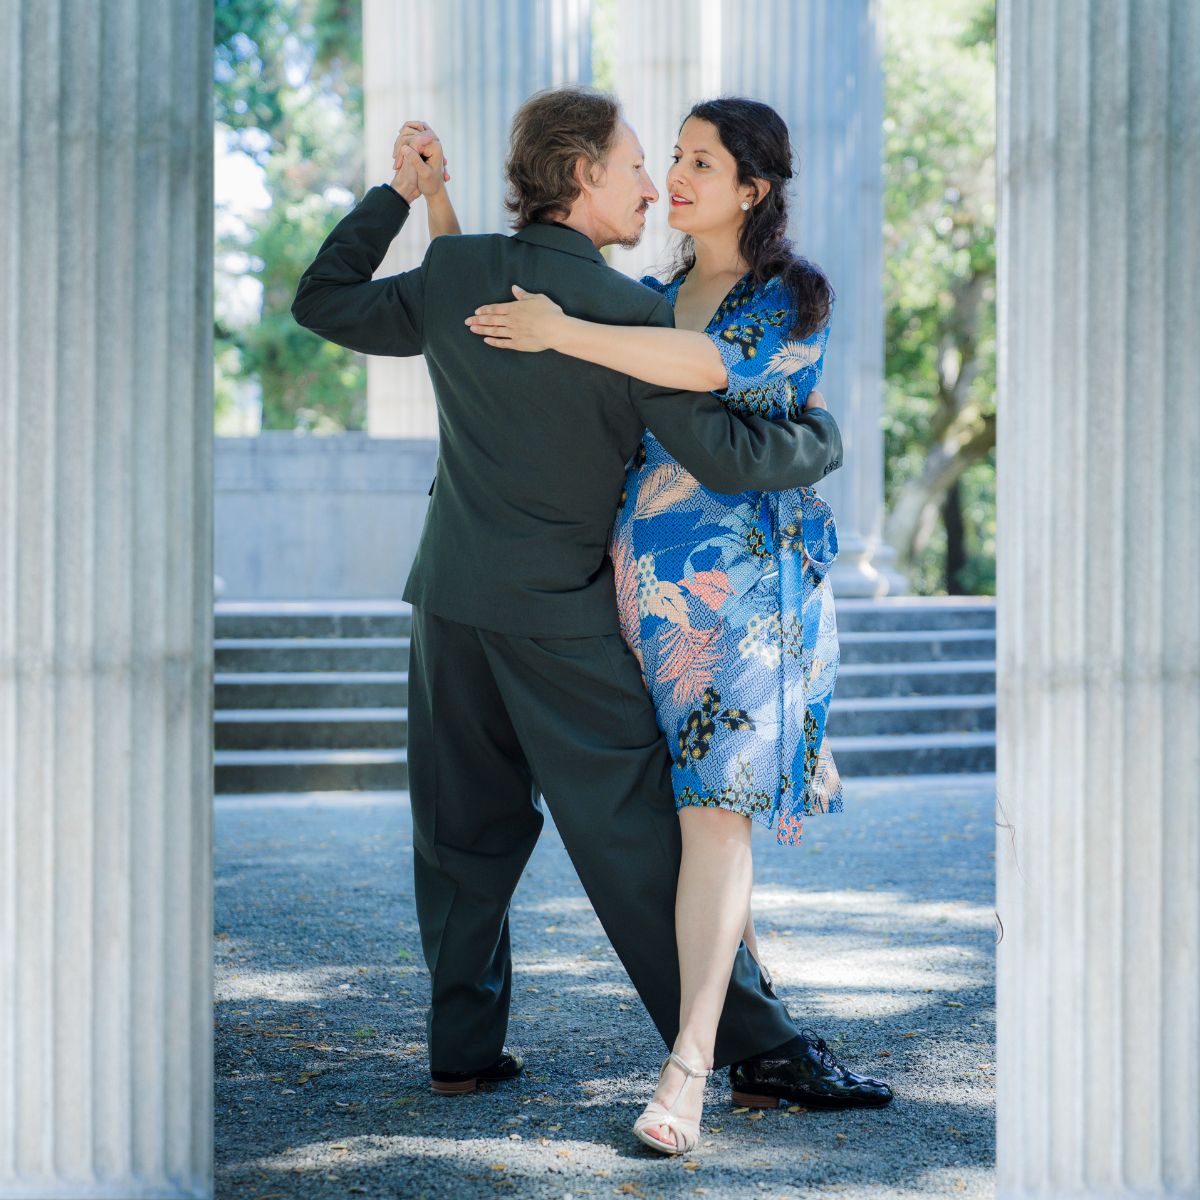 Argentine Tango dancing by Marcelo Solis and Mimi at Pulgas Water Temple, San Francisco, California.